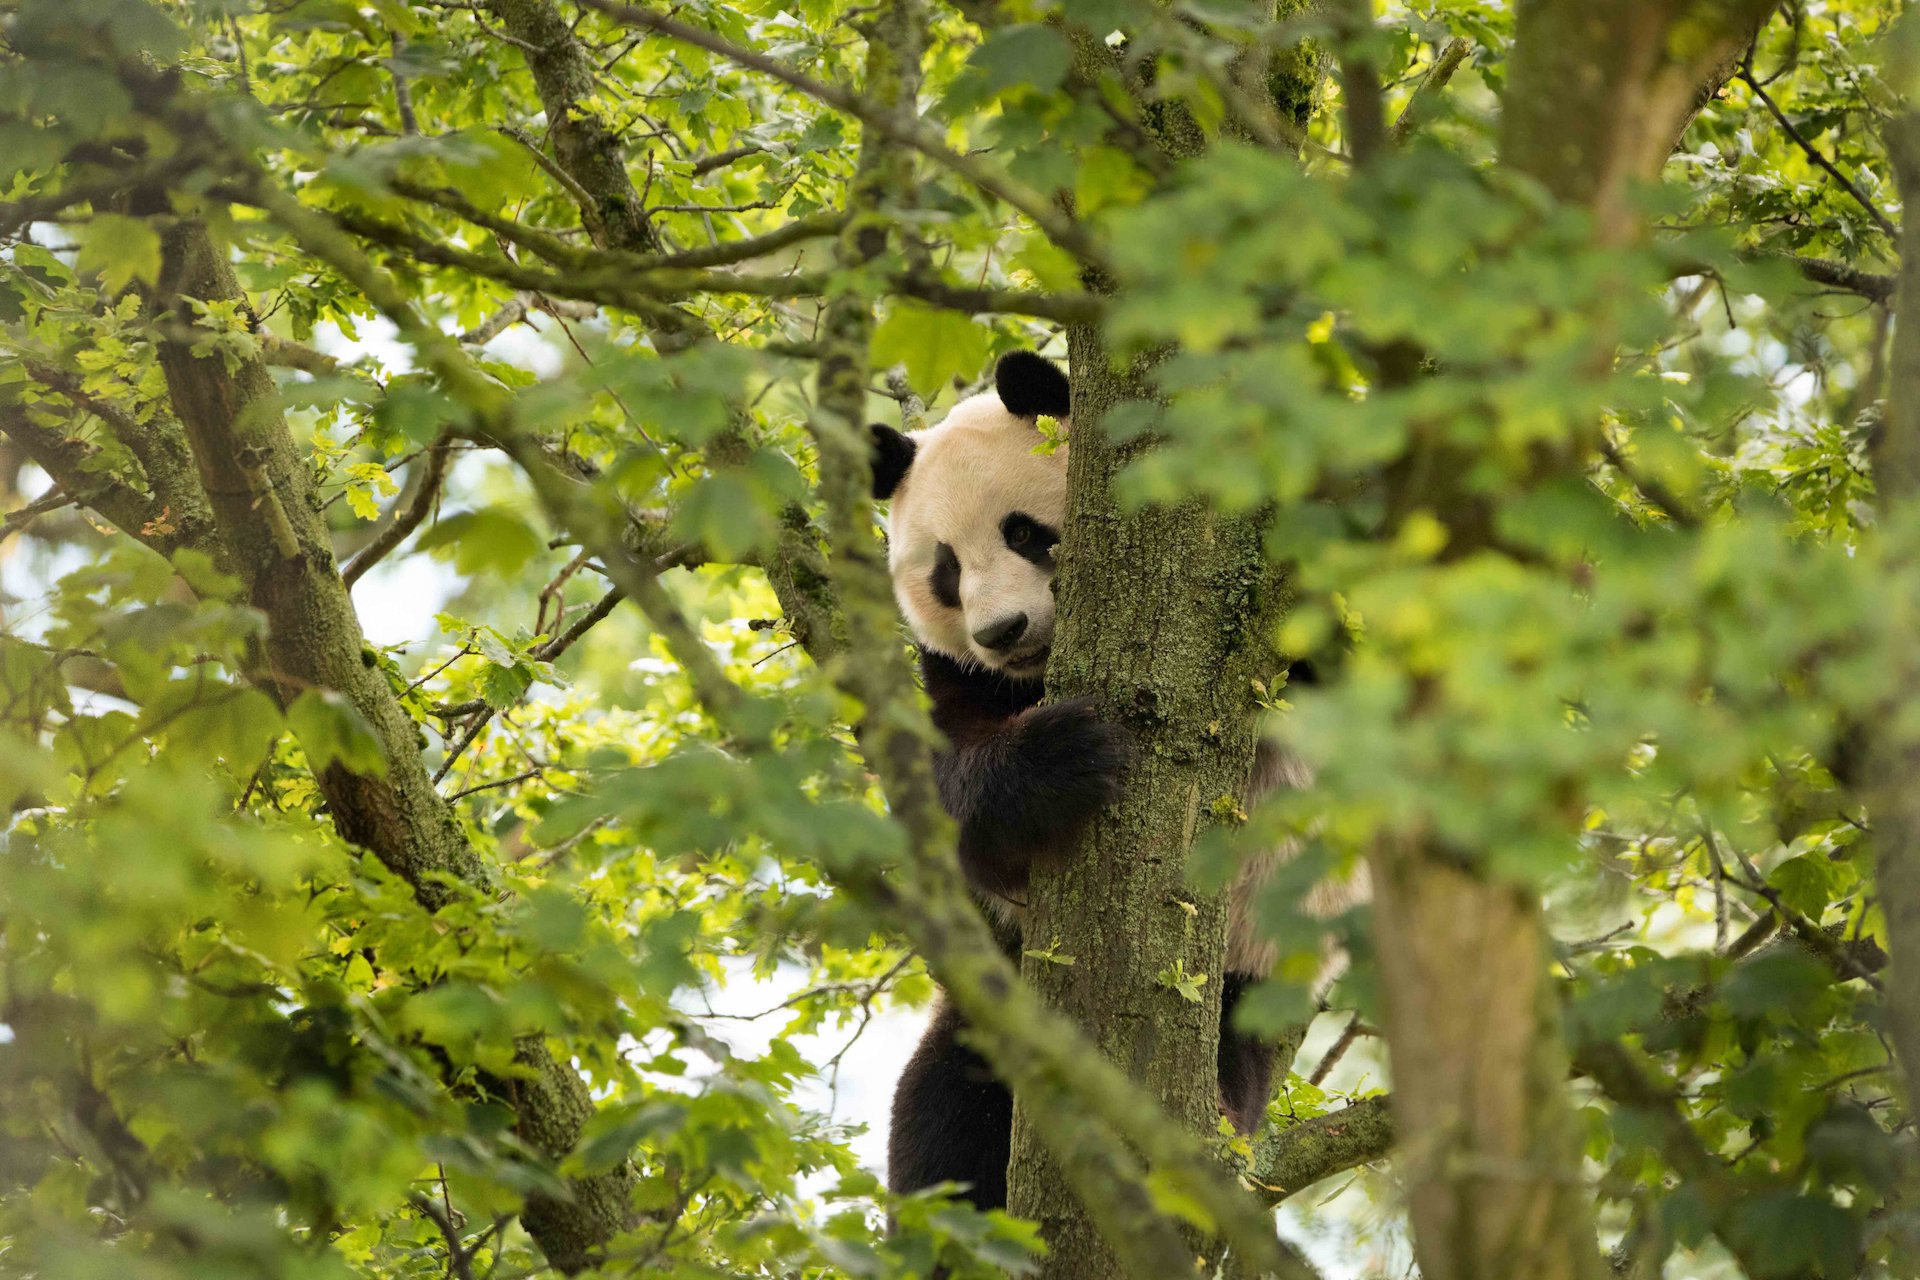 Giant panda Yang Guang climbing in tree peeking out between leaves and branches

Image: RZSS 2020